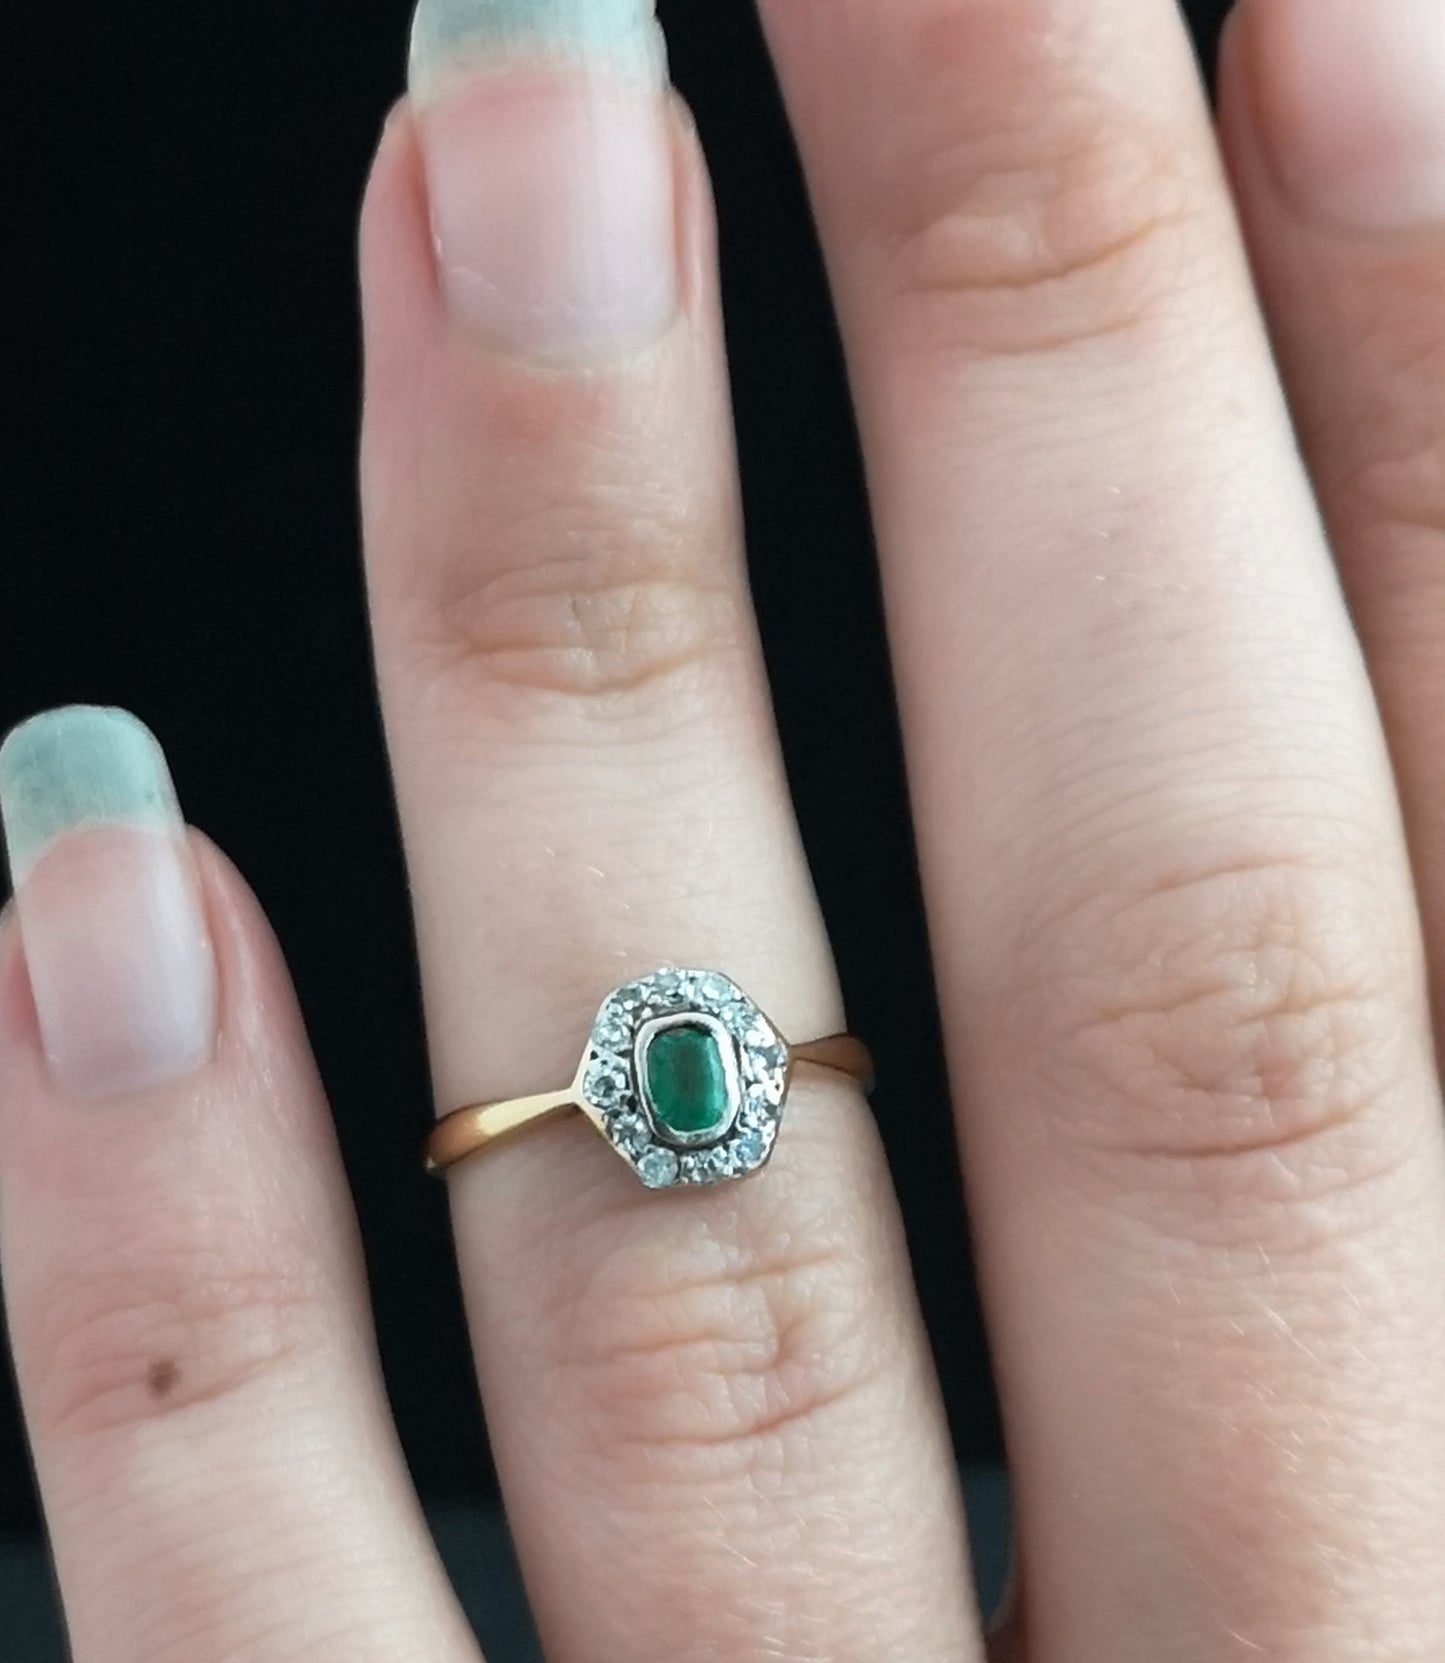 Vintage Art Deco diamond and emerald cluster ring